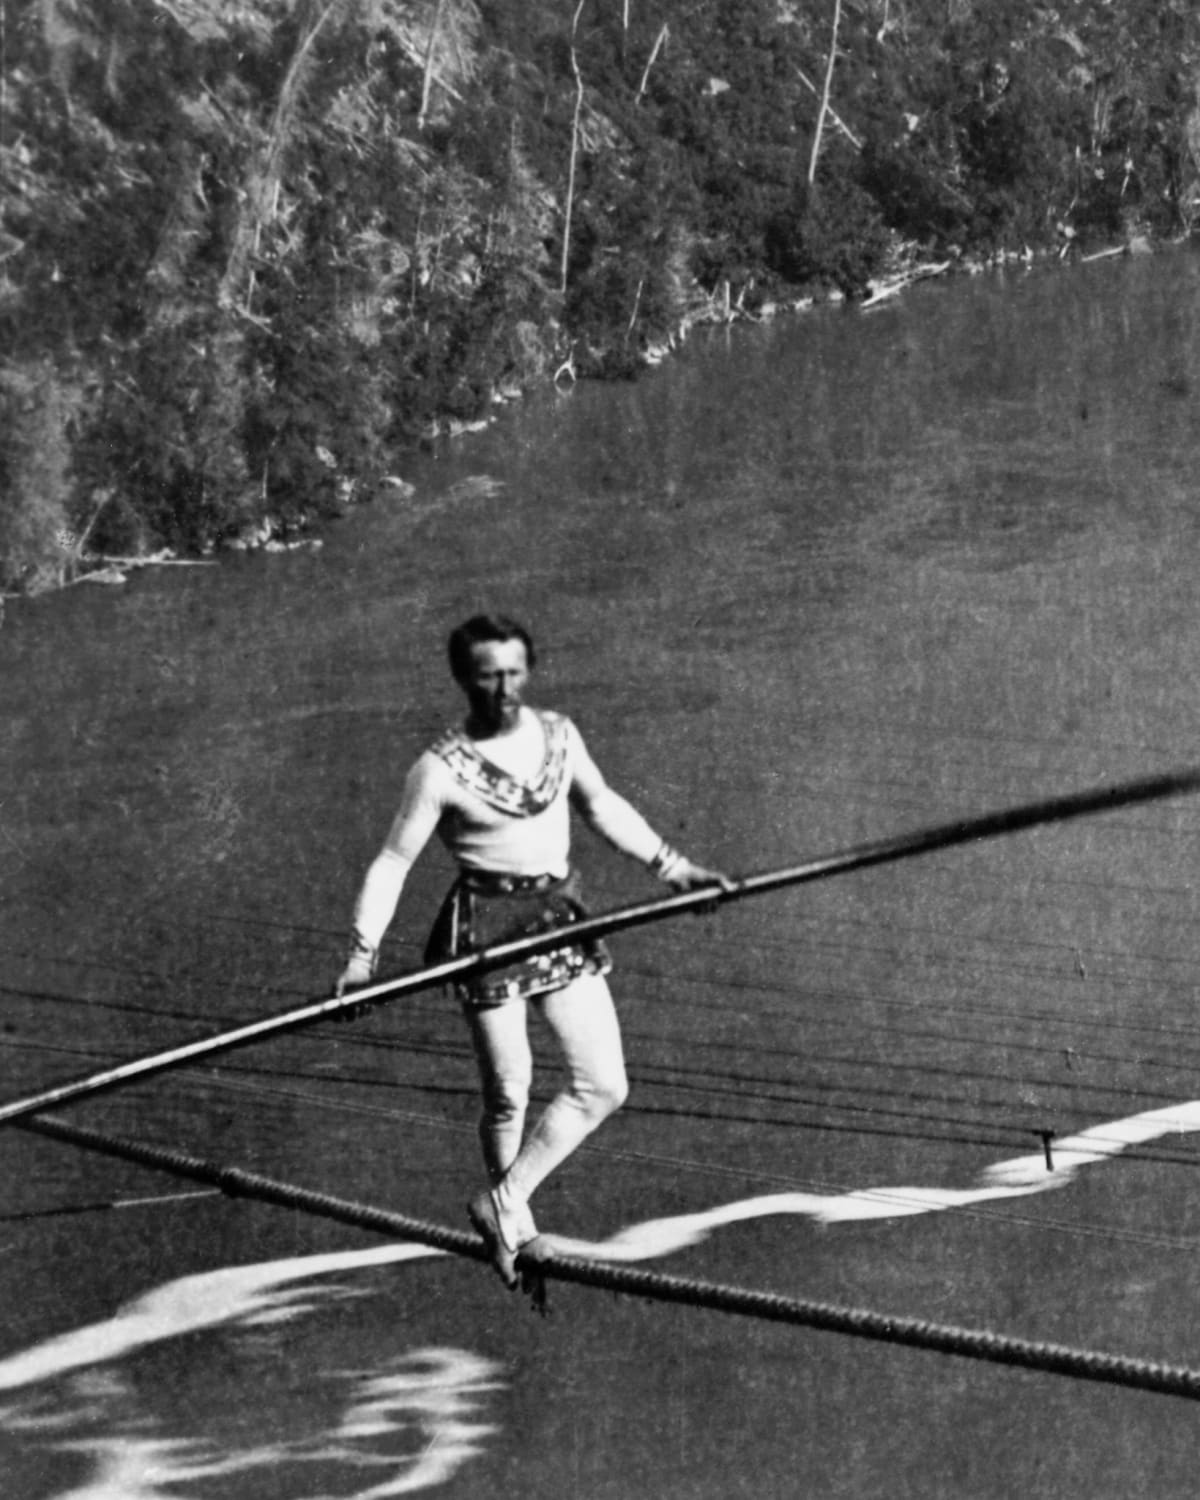 Jean Francois Gravelet, a Frenchman known professionally as Charles Blondin, became the first daredevil to walk across Niagara Falls on a tightrope on ThisDayInHistory in 1859. The feat was witnessed by some 5,000 spectators.